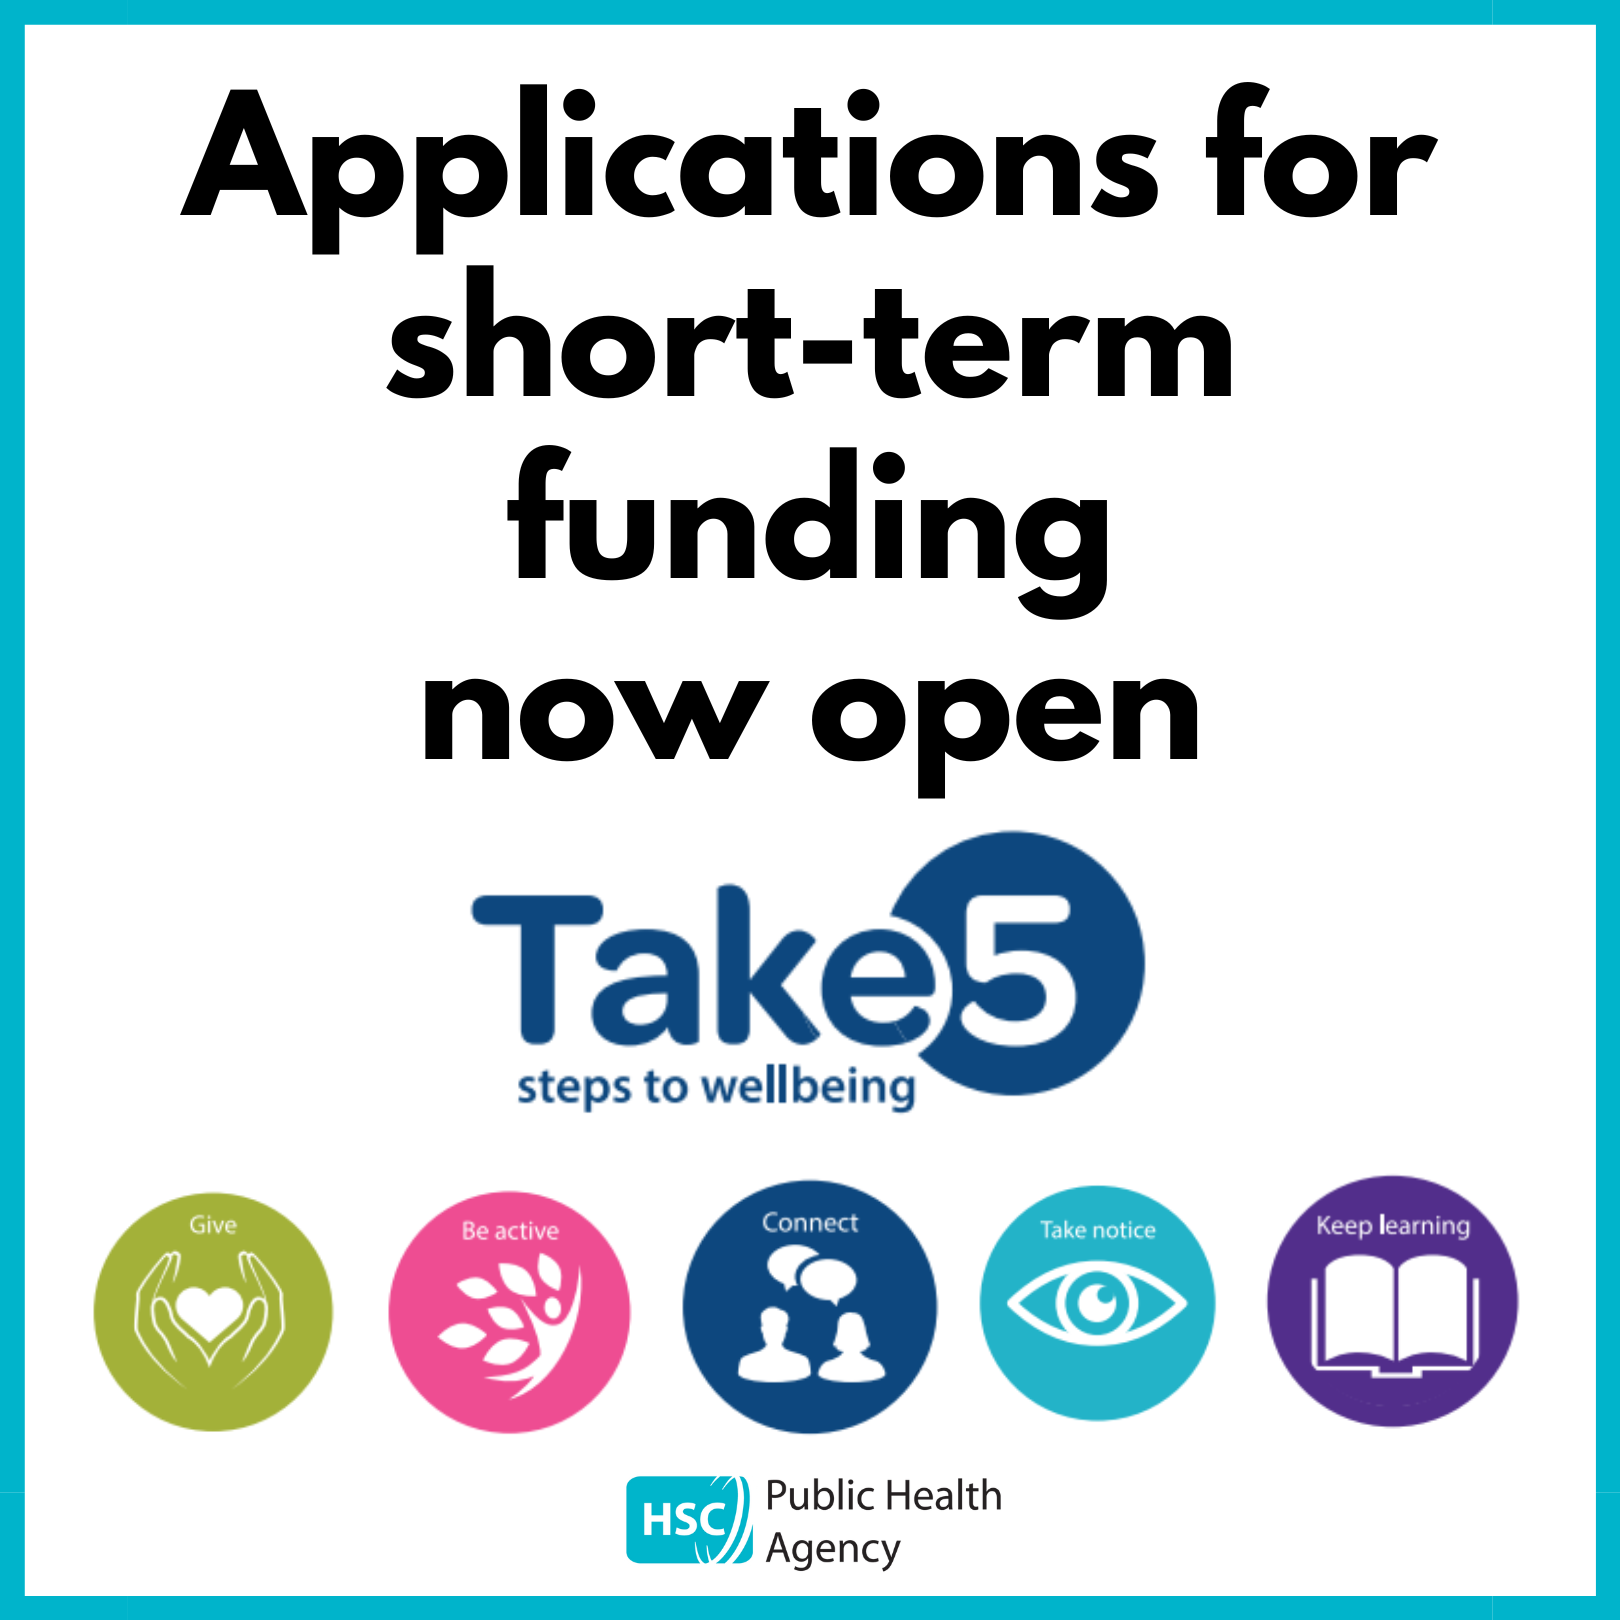 Applications for short-term funding